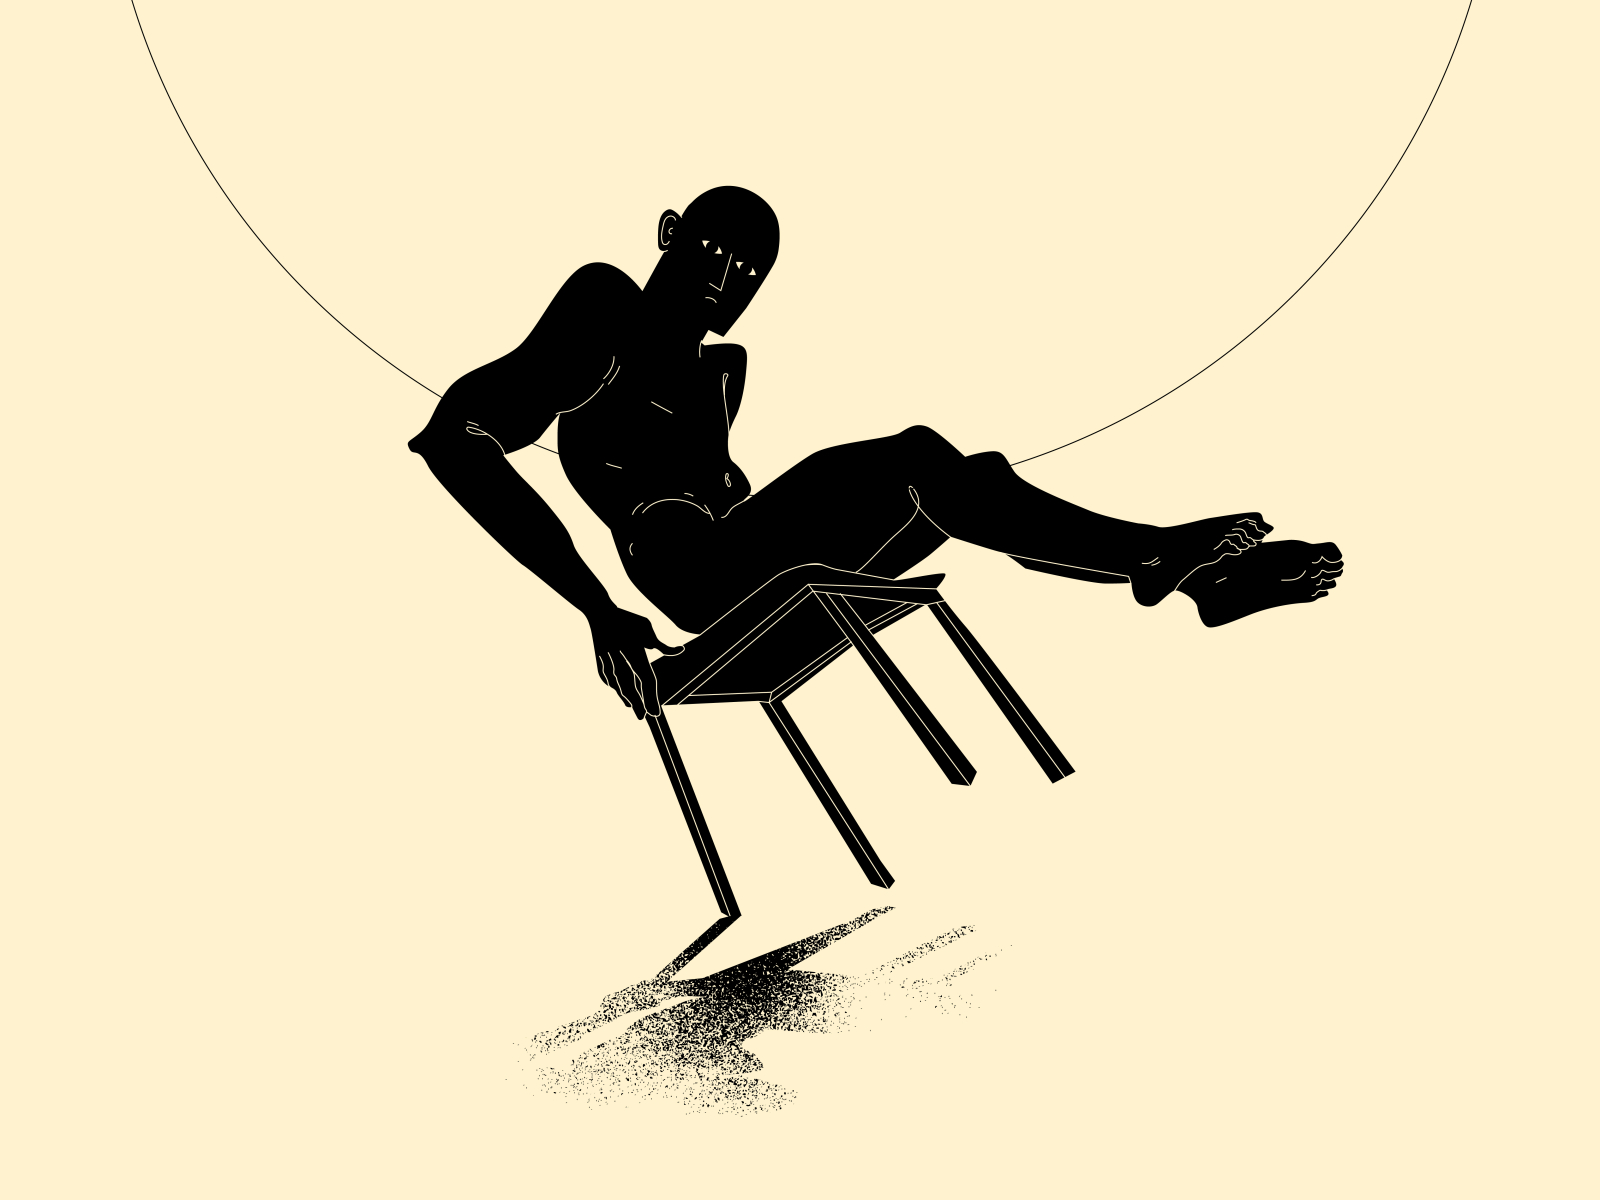 On Balance. abstract balance balancing chair chair illustration composition design dual meaning figure figure illustration illustration laconic lines minimal poster